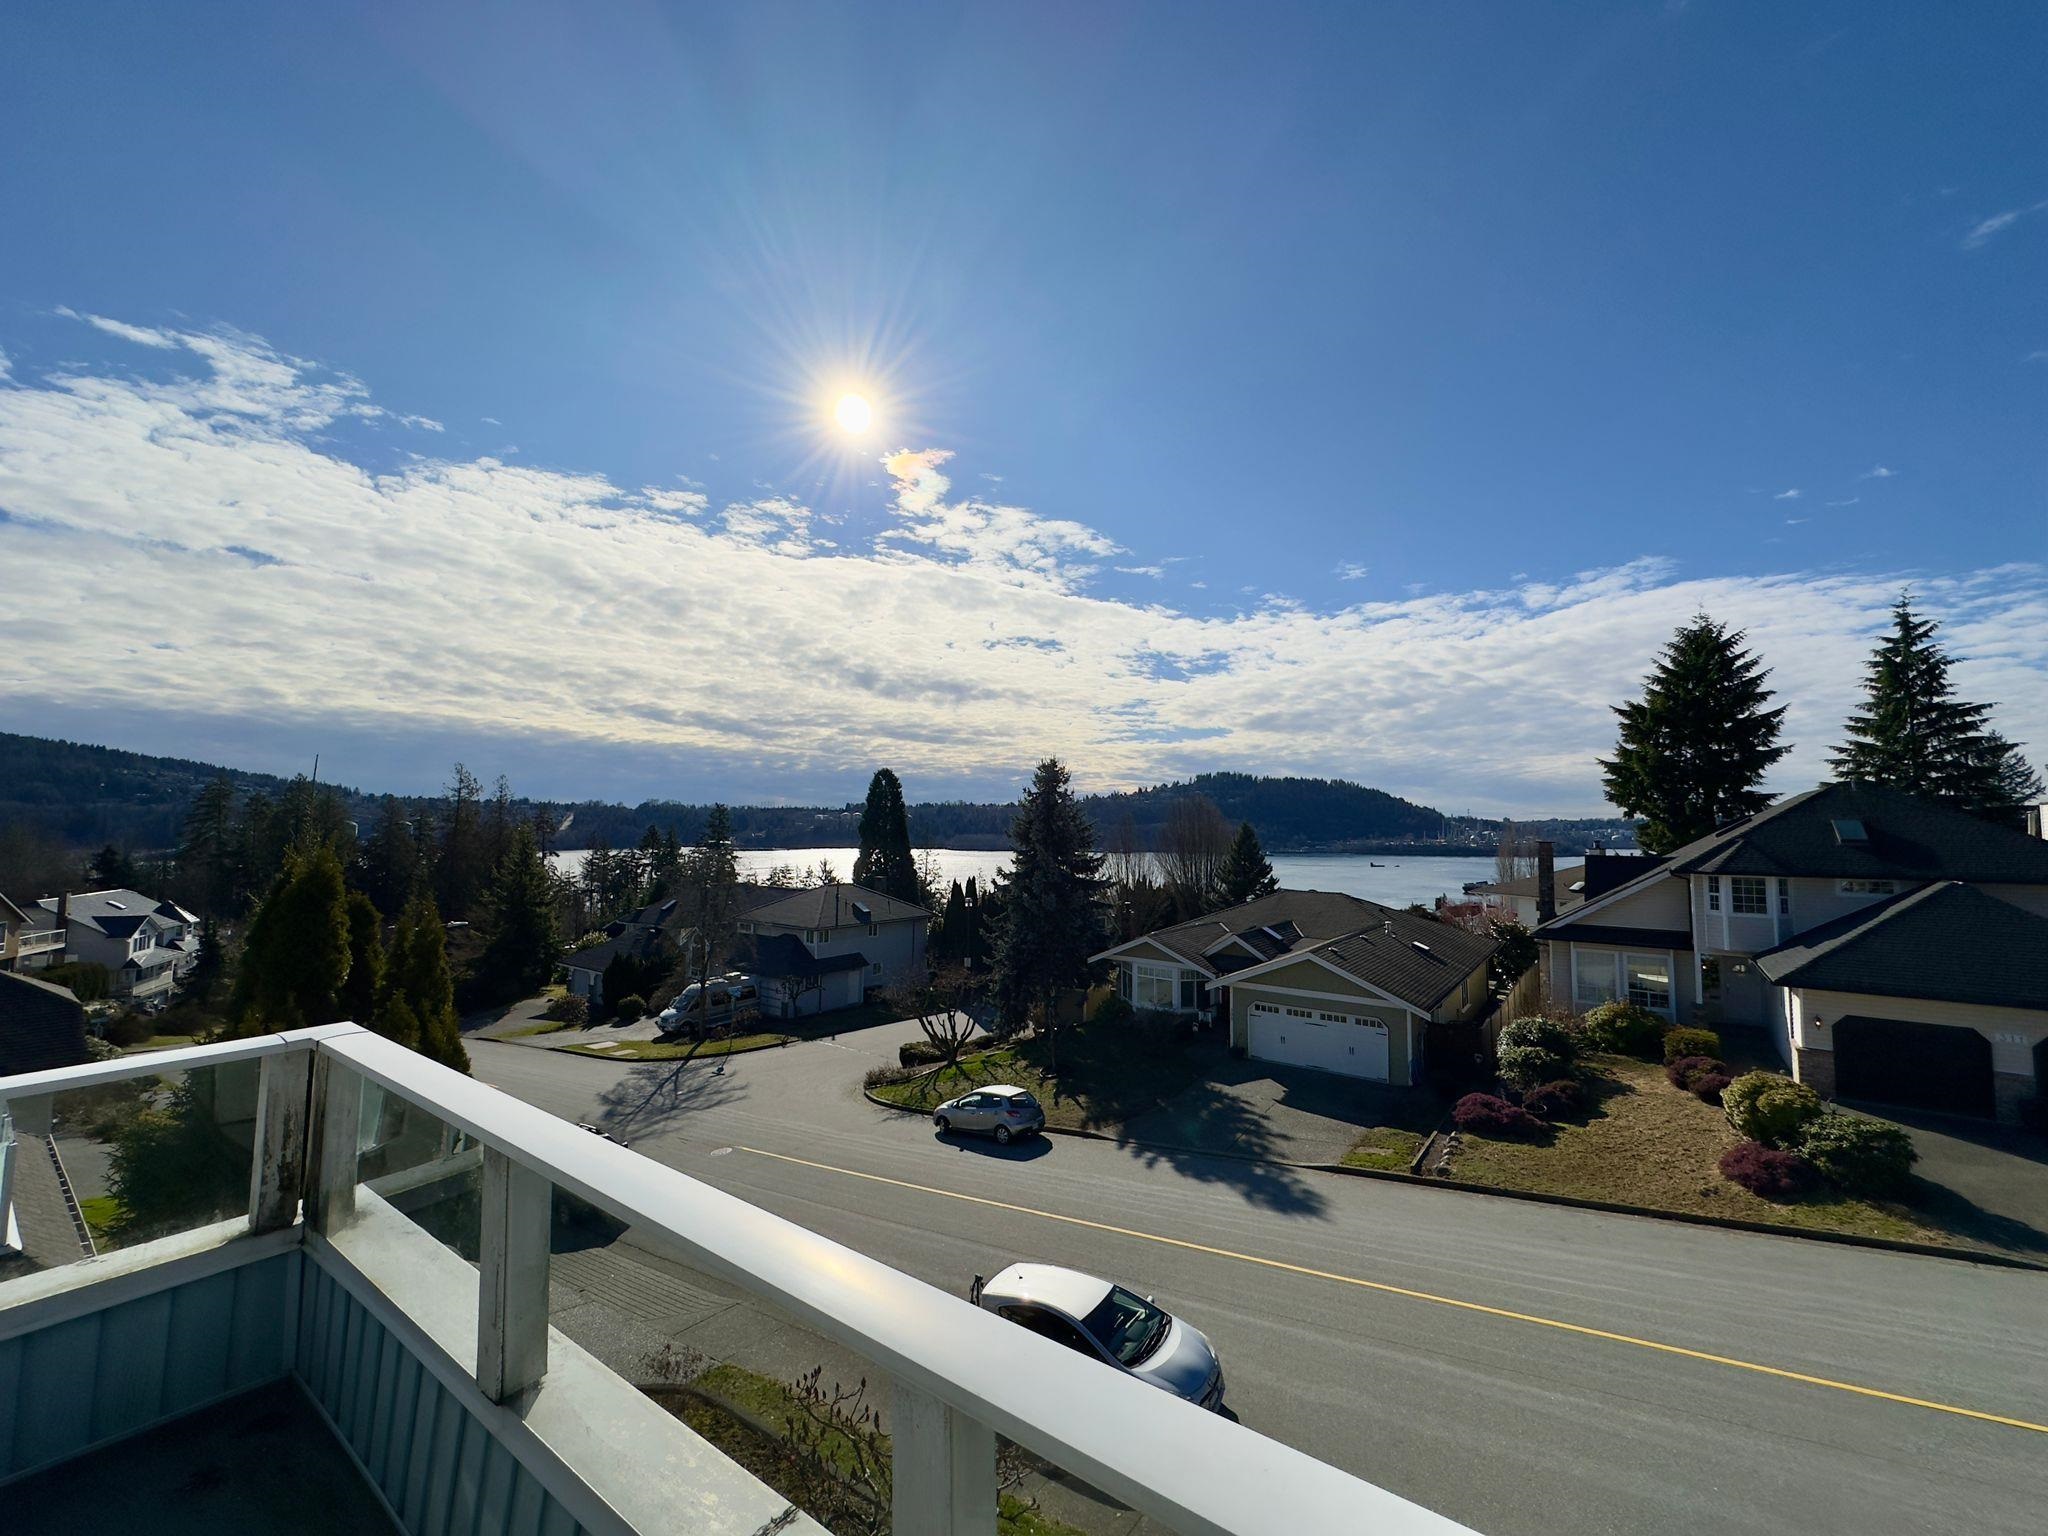 Listing image of 308 ROCHE POINT DRIVE